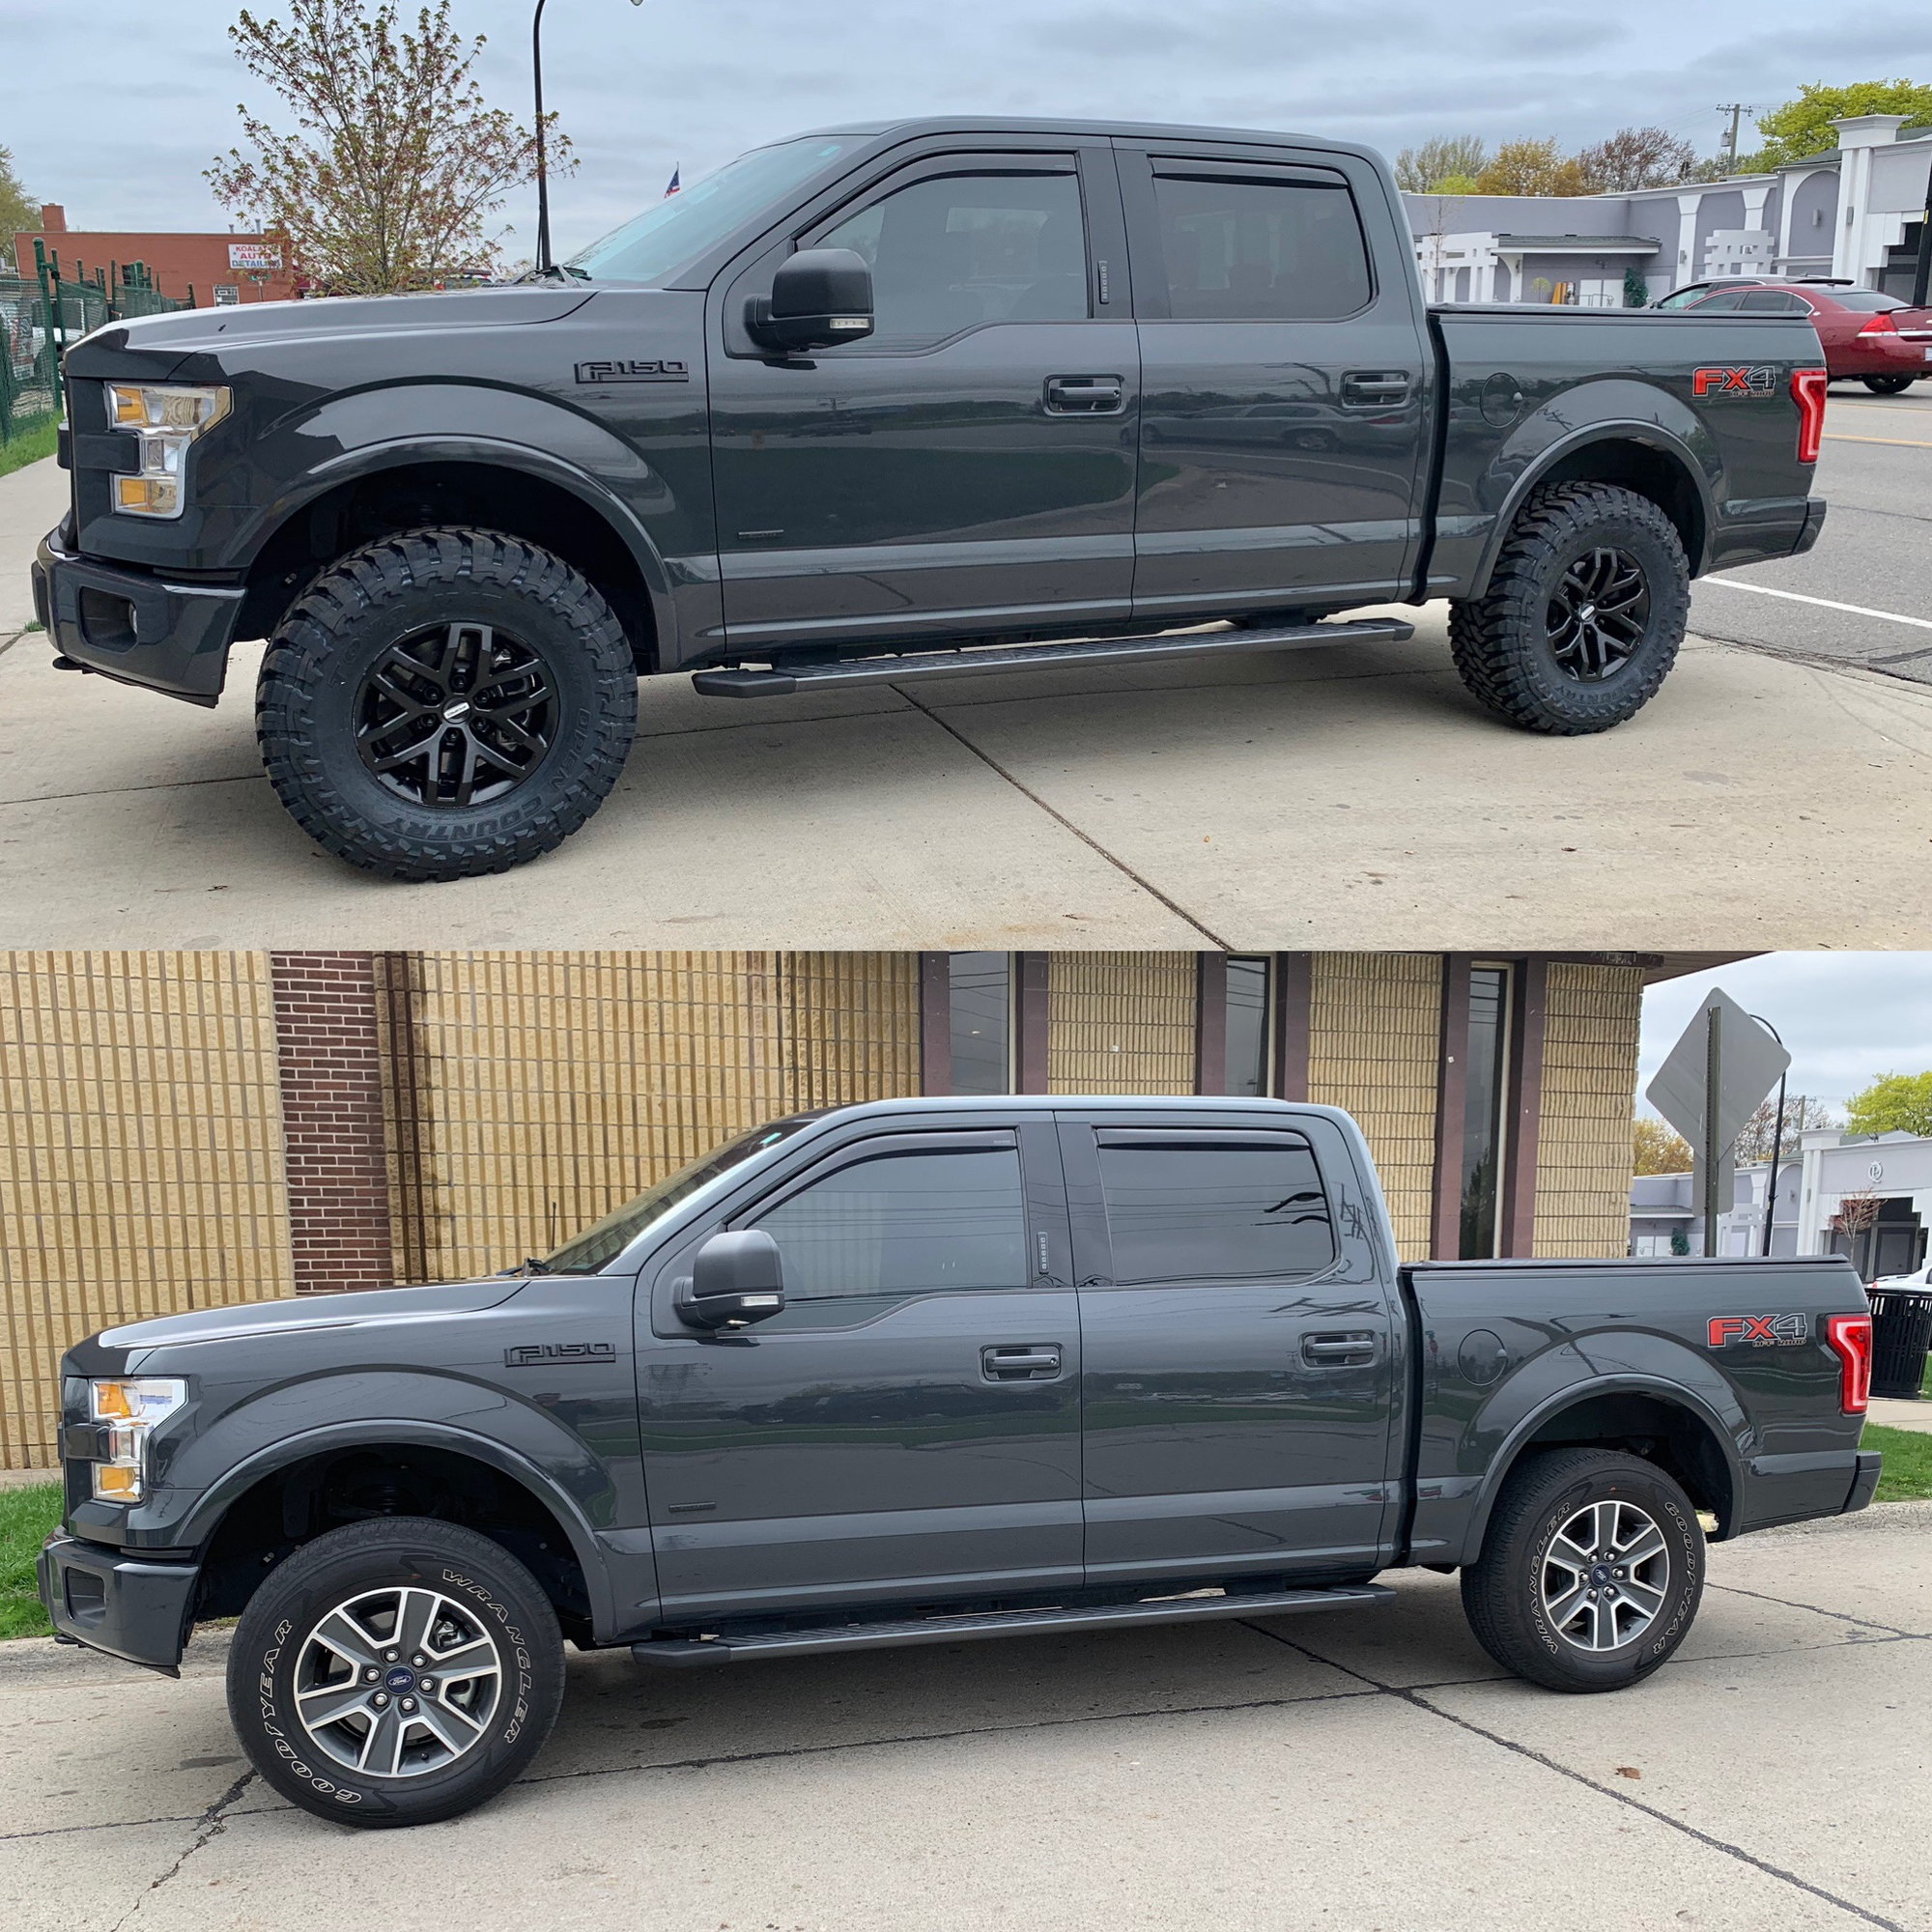 2017 raptor wheels, who got them on? PICS - Page 40 - Ford F150 Forum ...